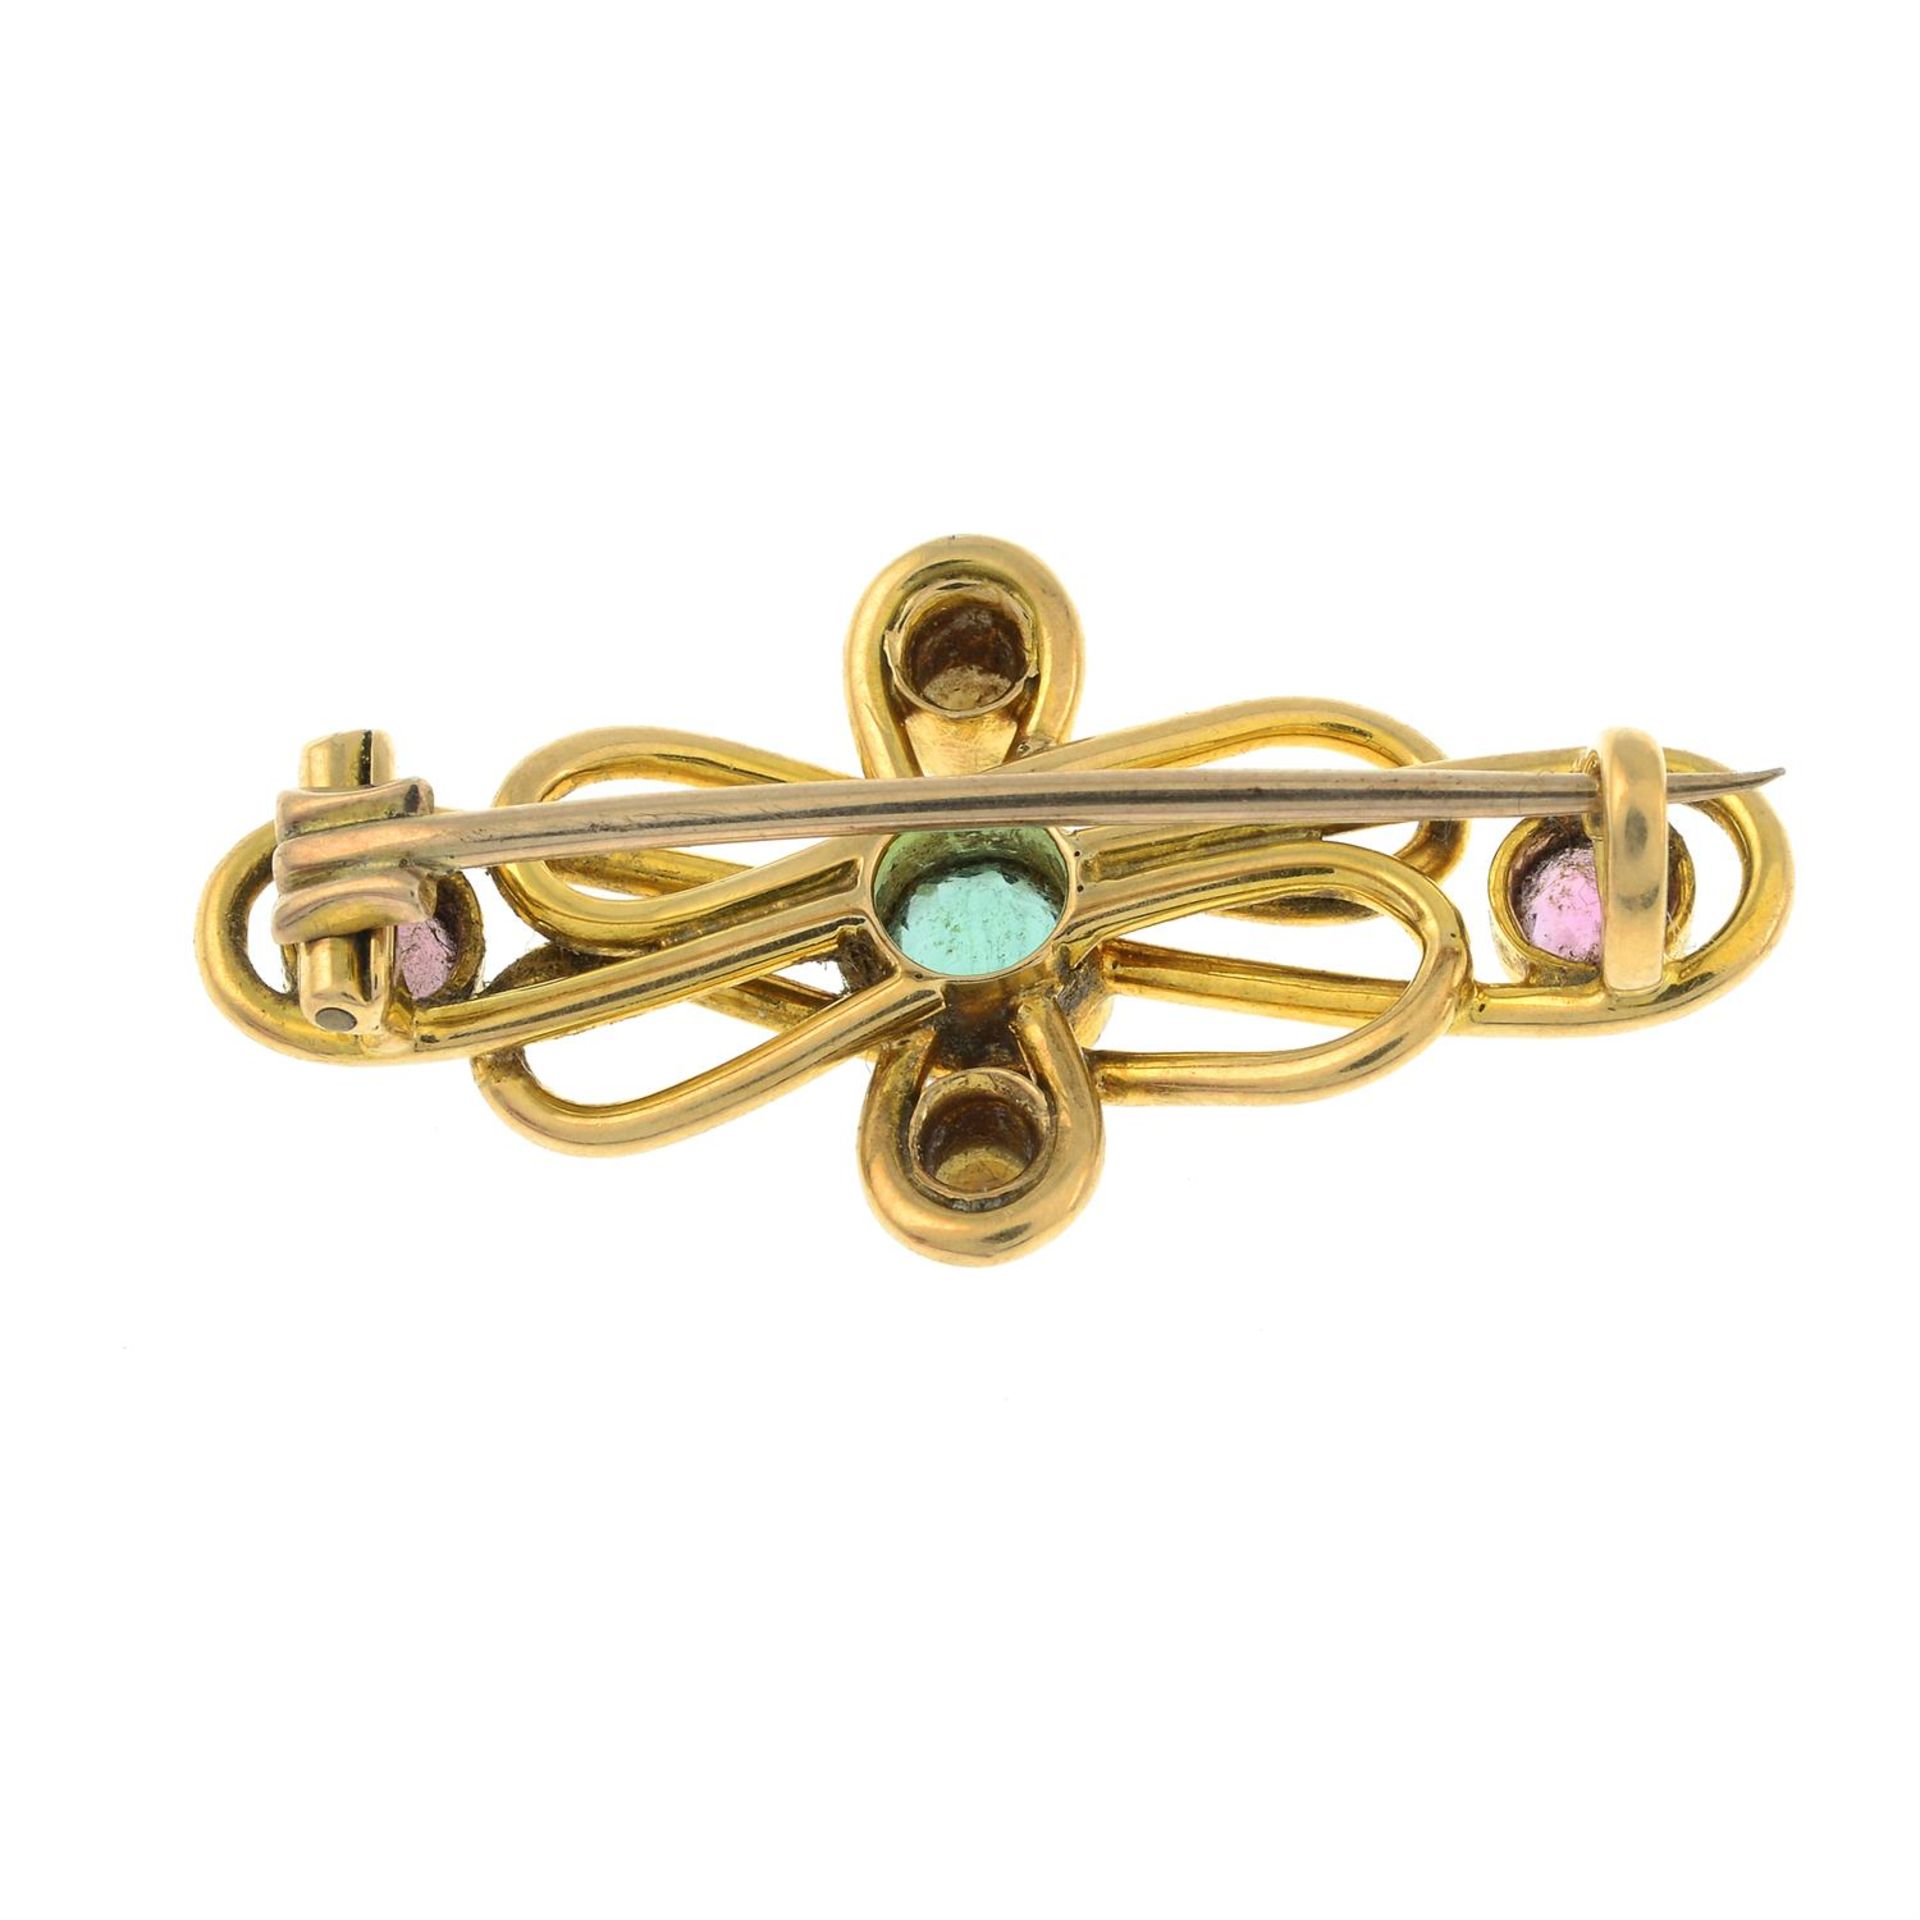 An early 20th century gold tourmaline and split pearl brooch. - Image 2 of 2